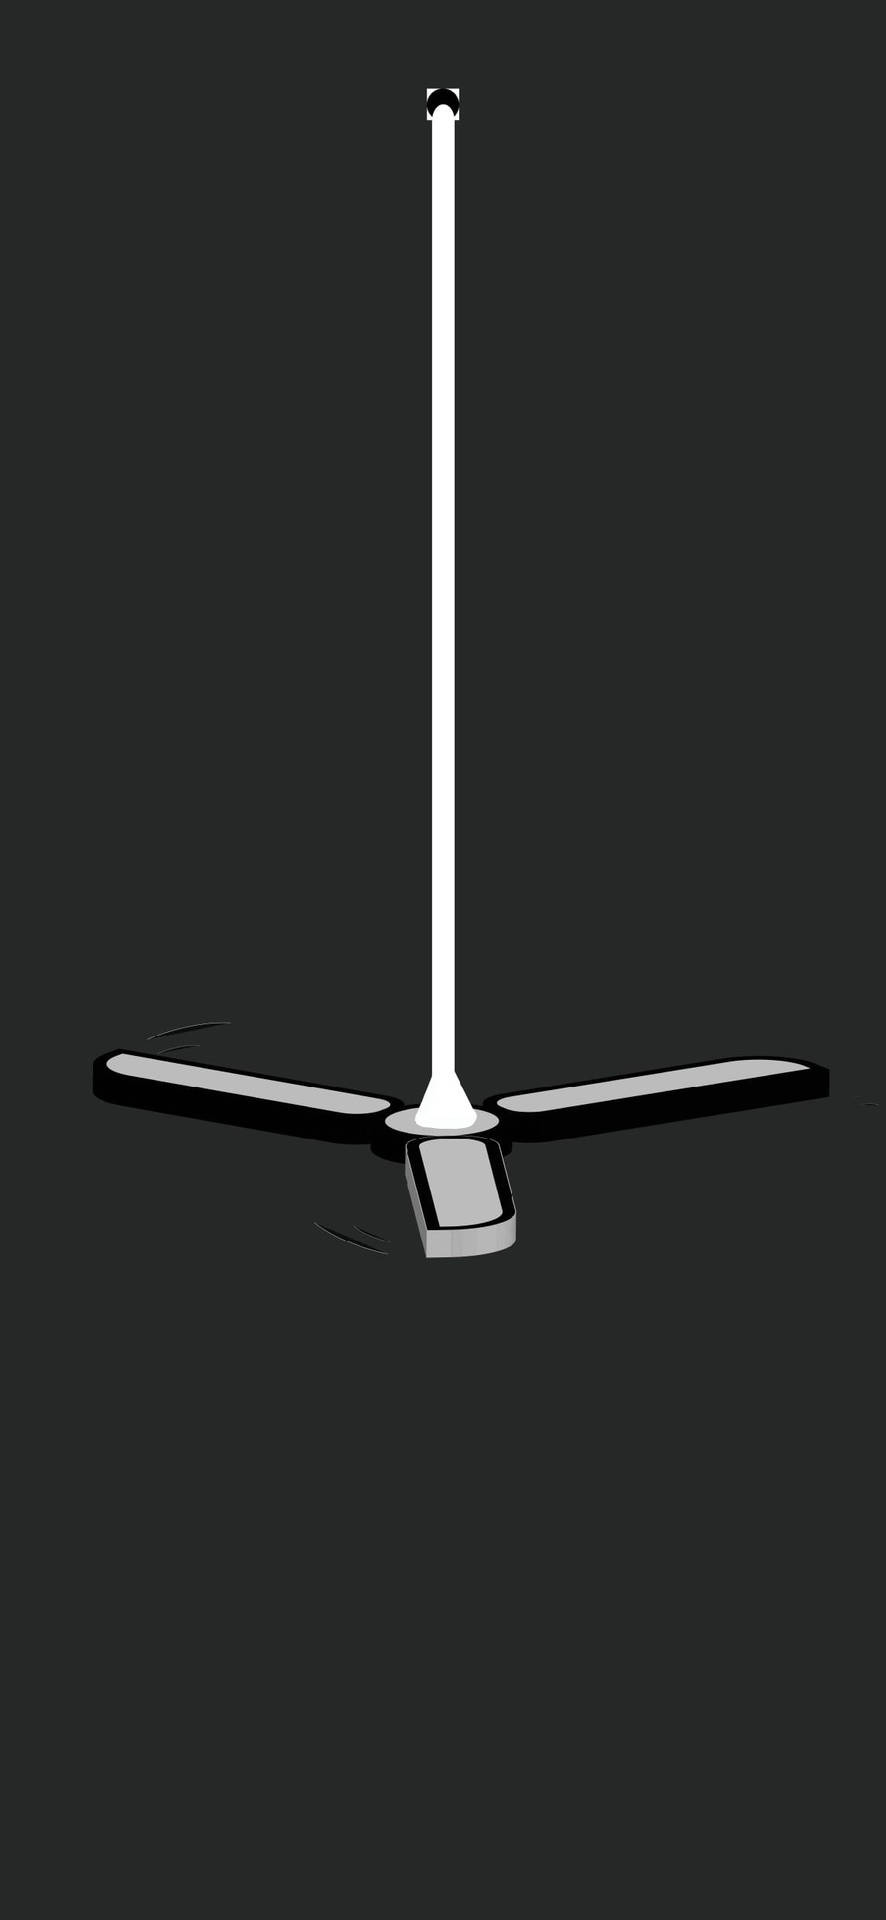 Ceiling Fan With Innovative Middle Punch Hole Design Background